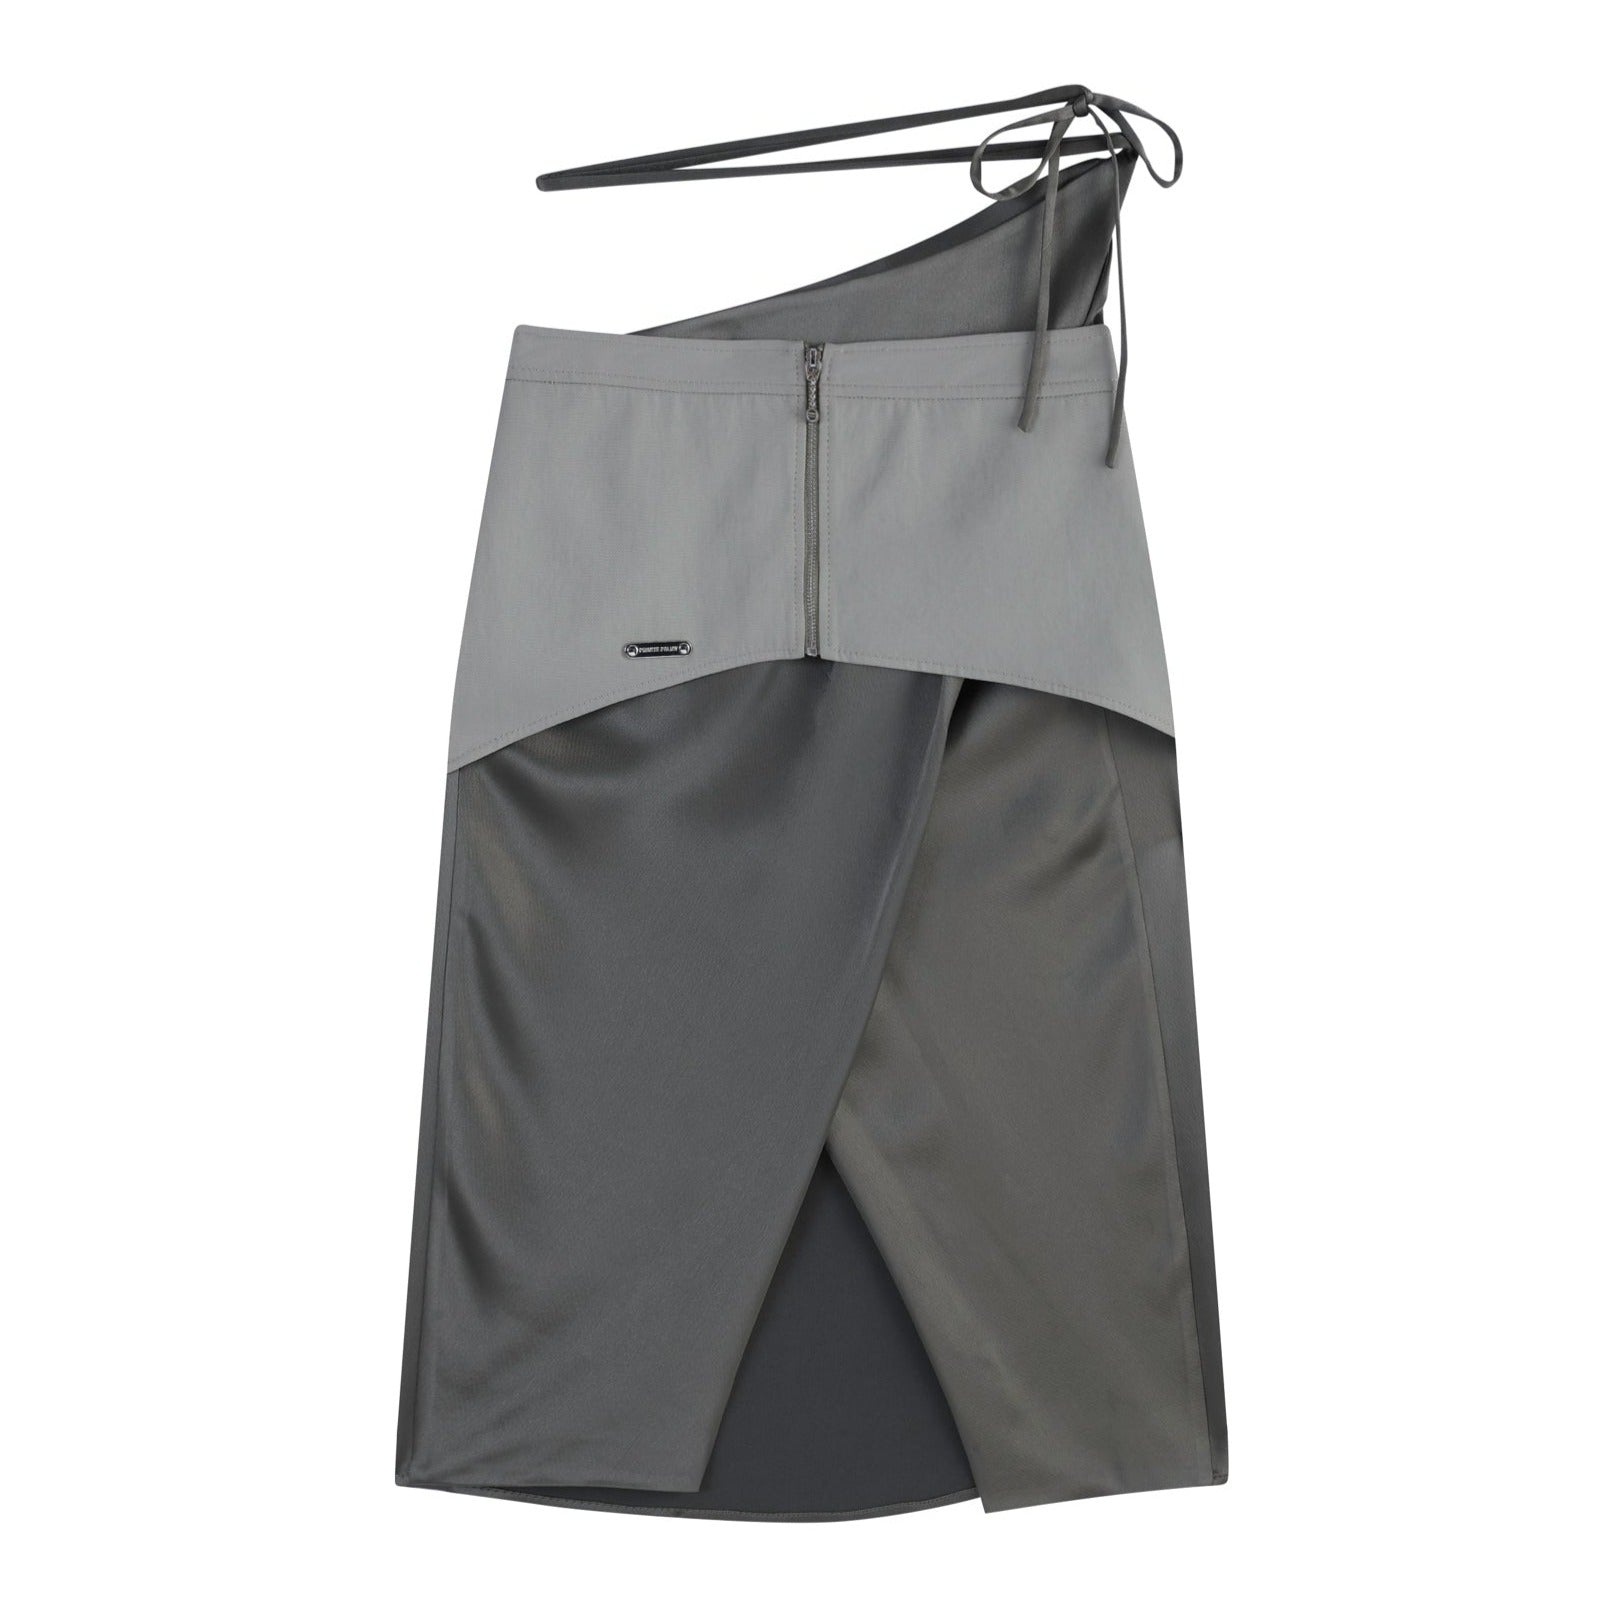 PRIVATE POLICY - Double Layers Draping Tie Strap Skirt, buy at doors.nyc